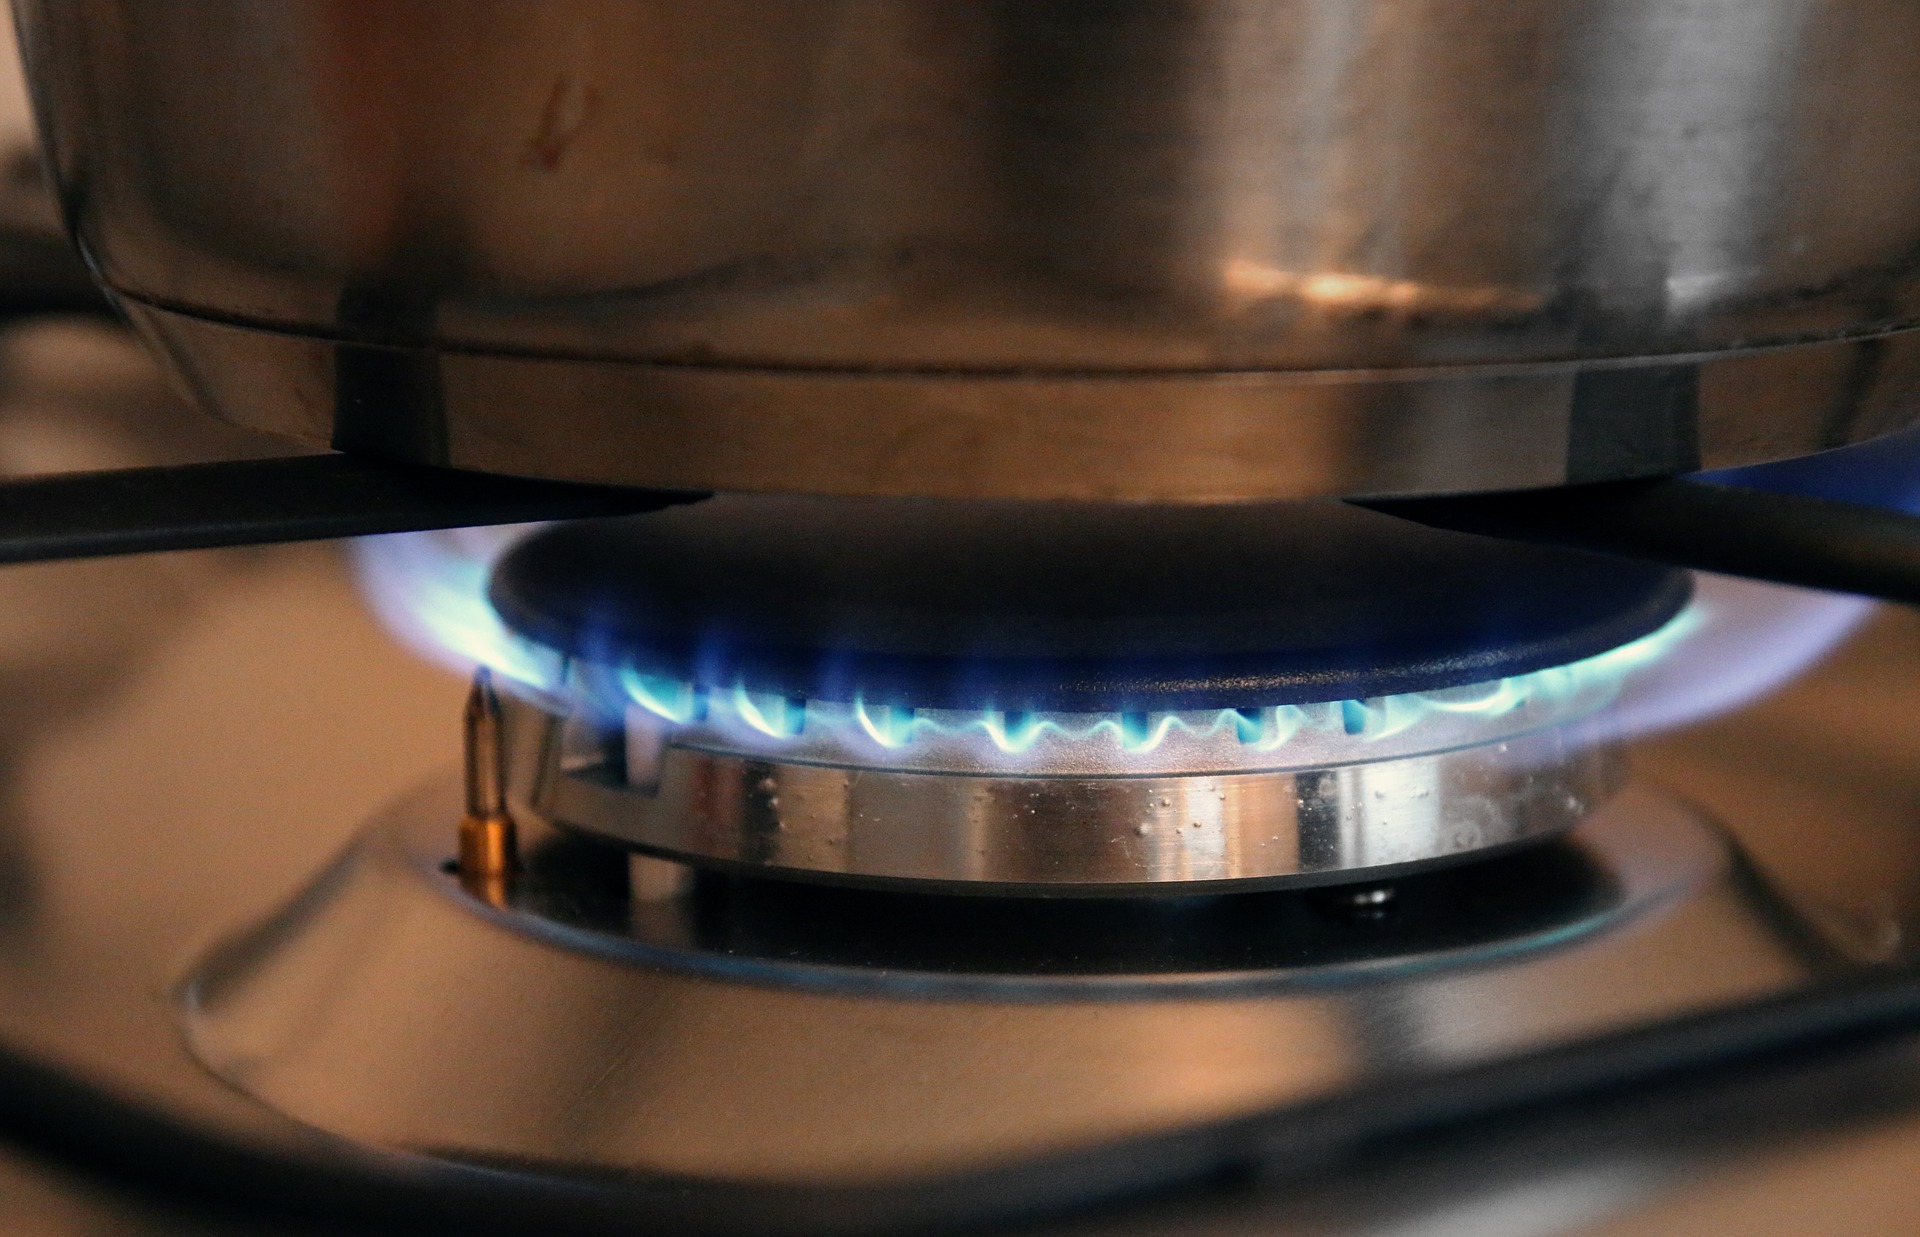 Image shows a lit gas stove burner. The flames are blue and there is a pot on the burner.